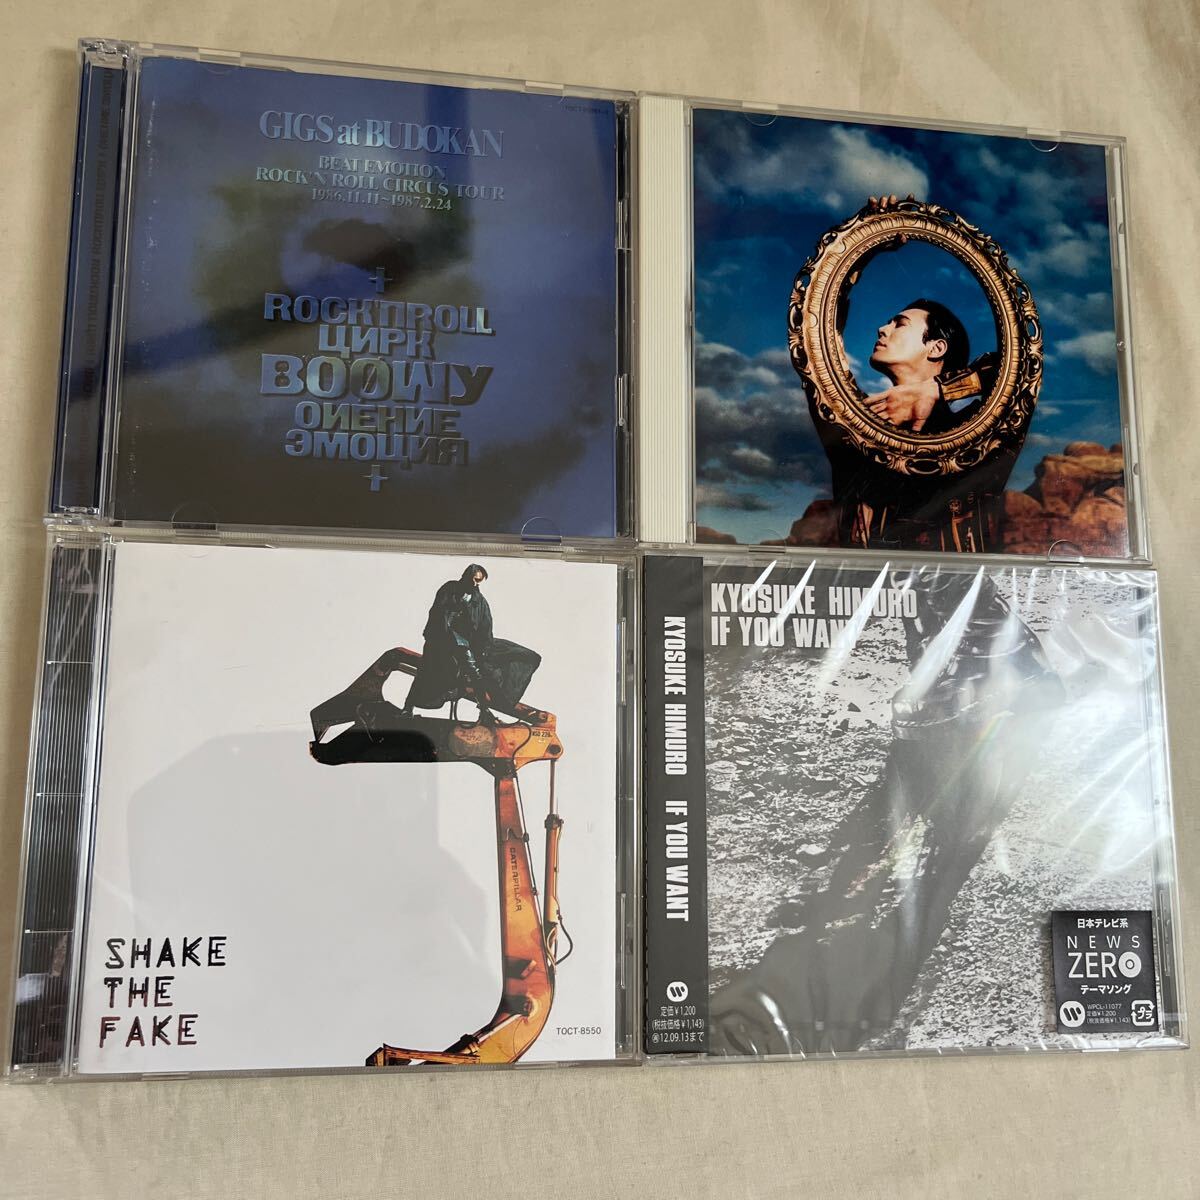 BOOWY 氷室京介 CD4枚セット GIGS at BUDOKAN/Memories Of Blue/SHAKE THE FAKE/IF YOU WANTの画像1